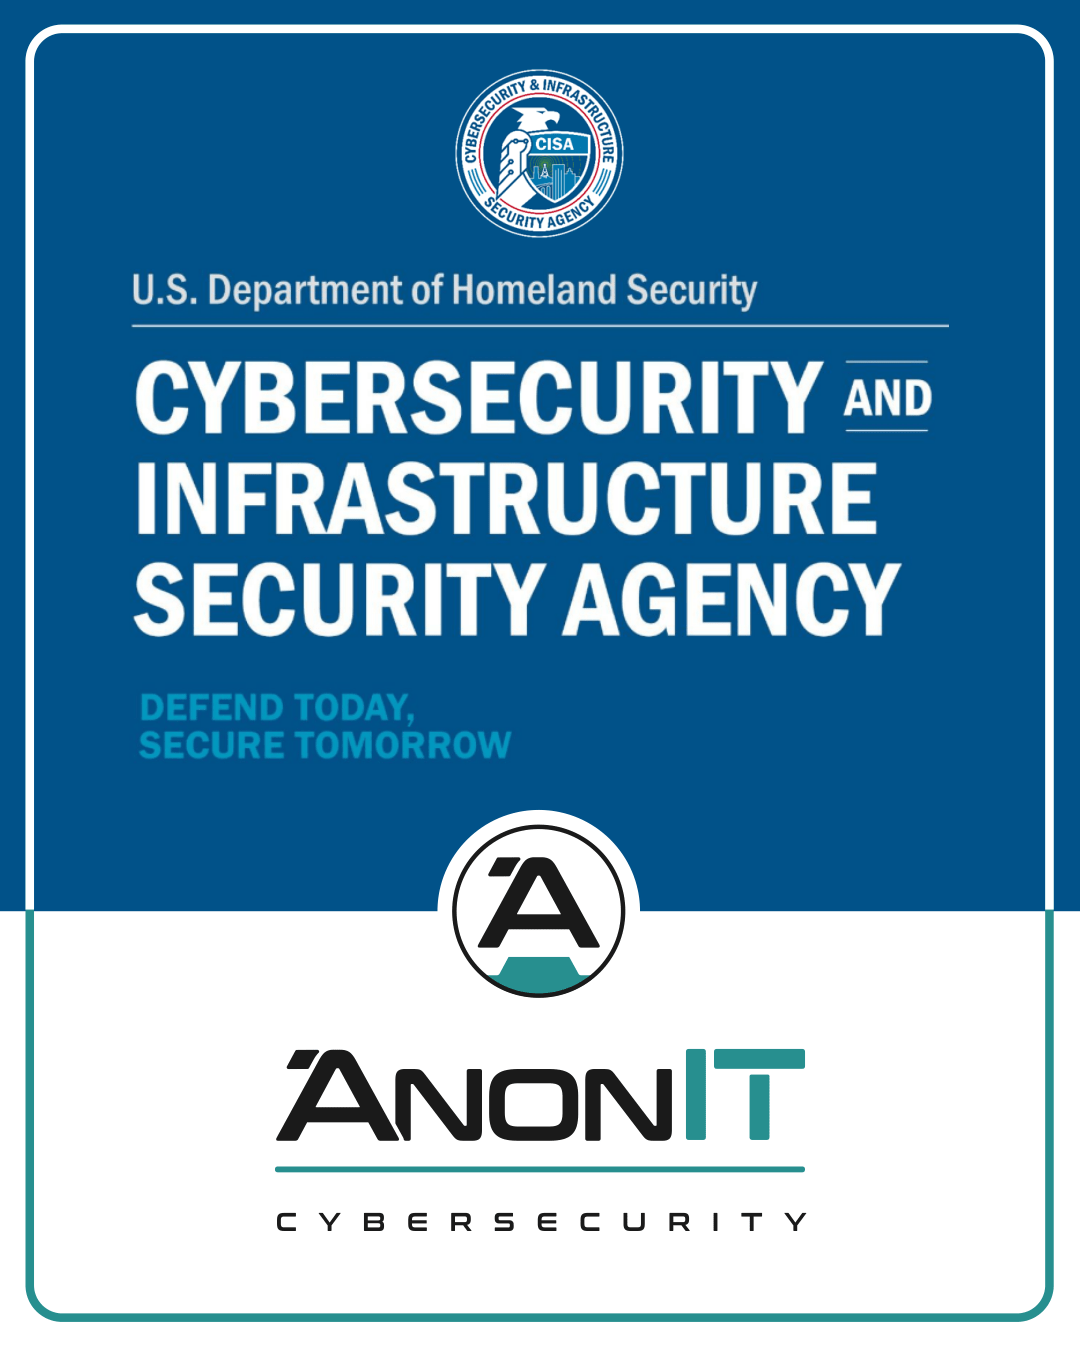 CISA CYBERSECURITY AWARENESS MONTH Anon IT